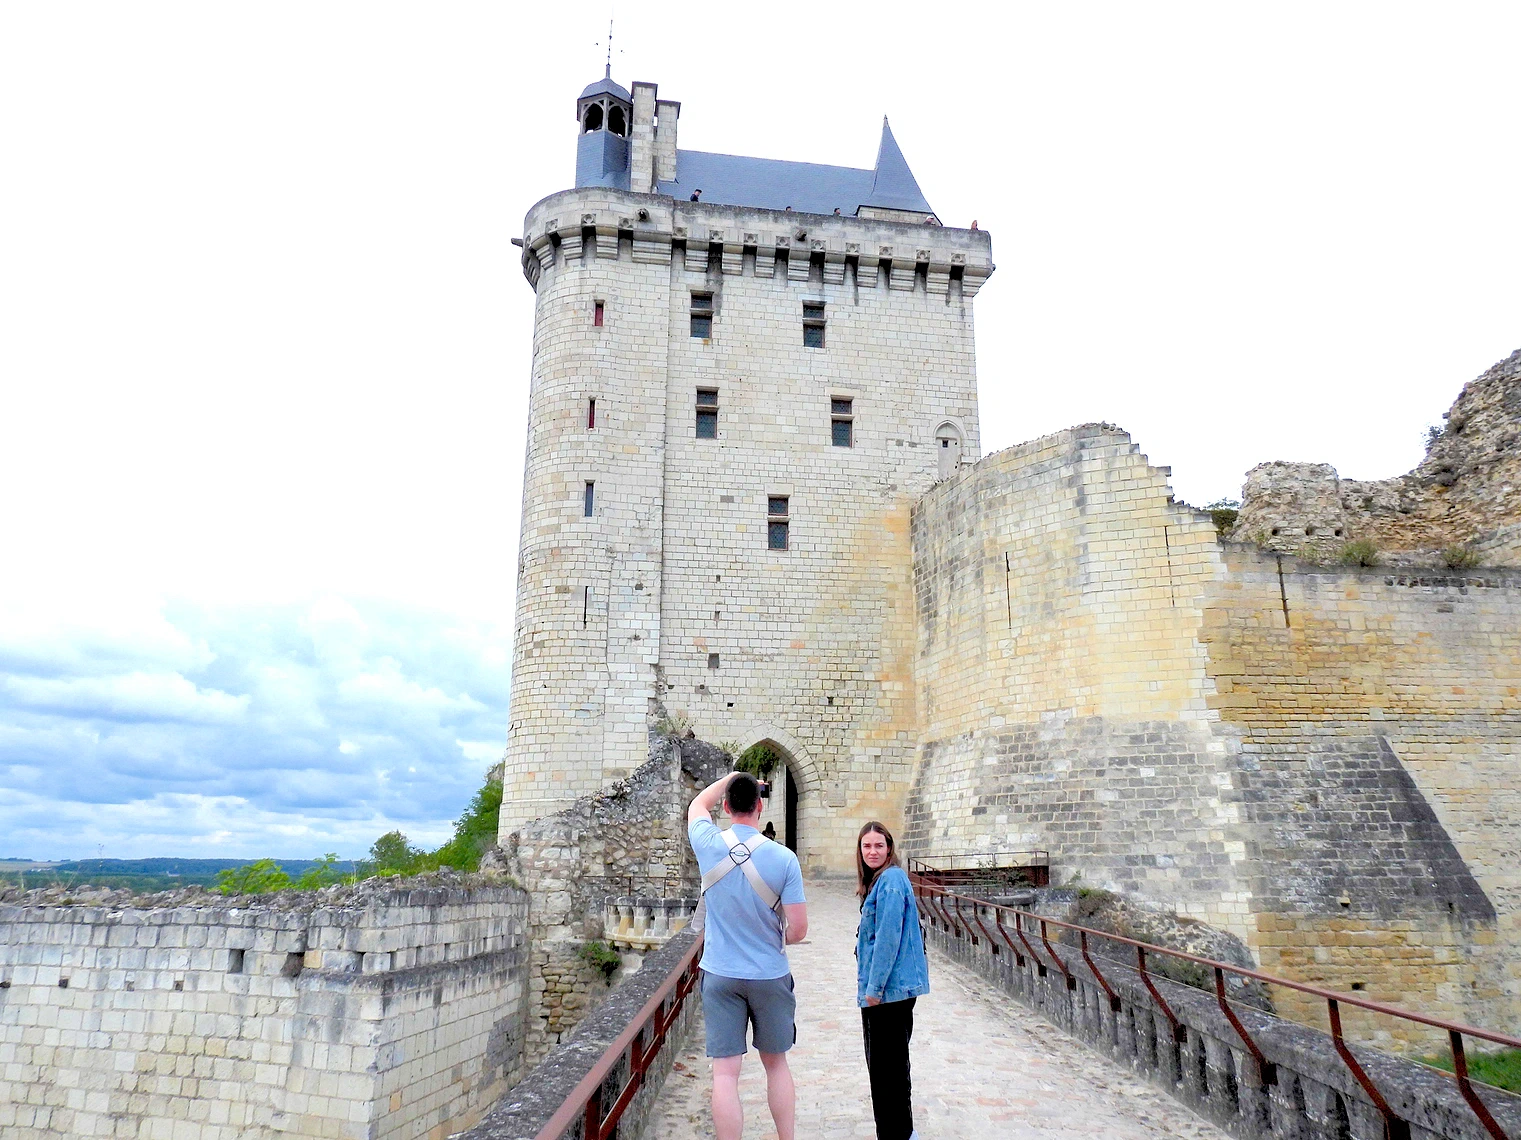 All Images from our Chateau-Infused European Sojourn Trip